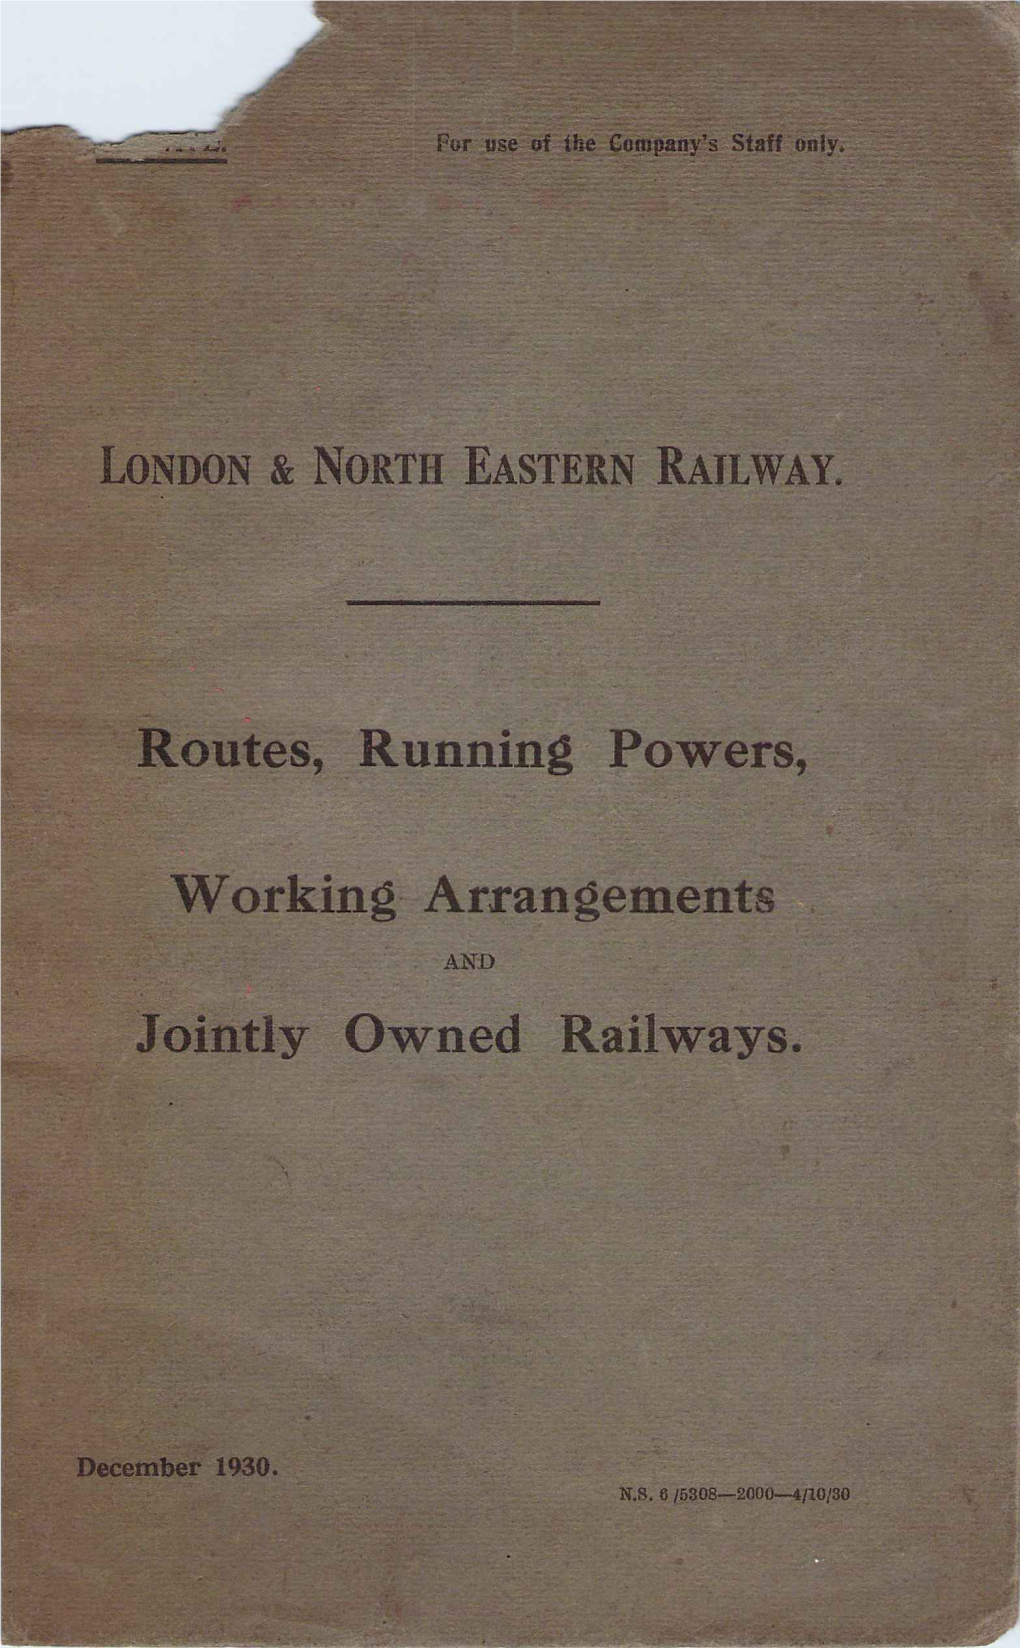 LONDON & NORTH EASTERN RAILWAY. Routes, Running